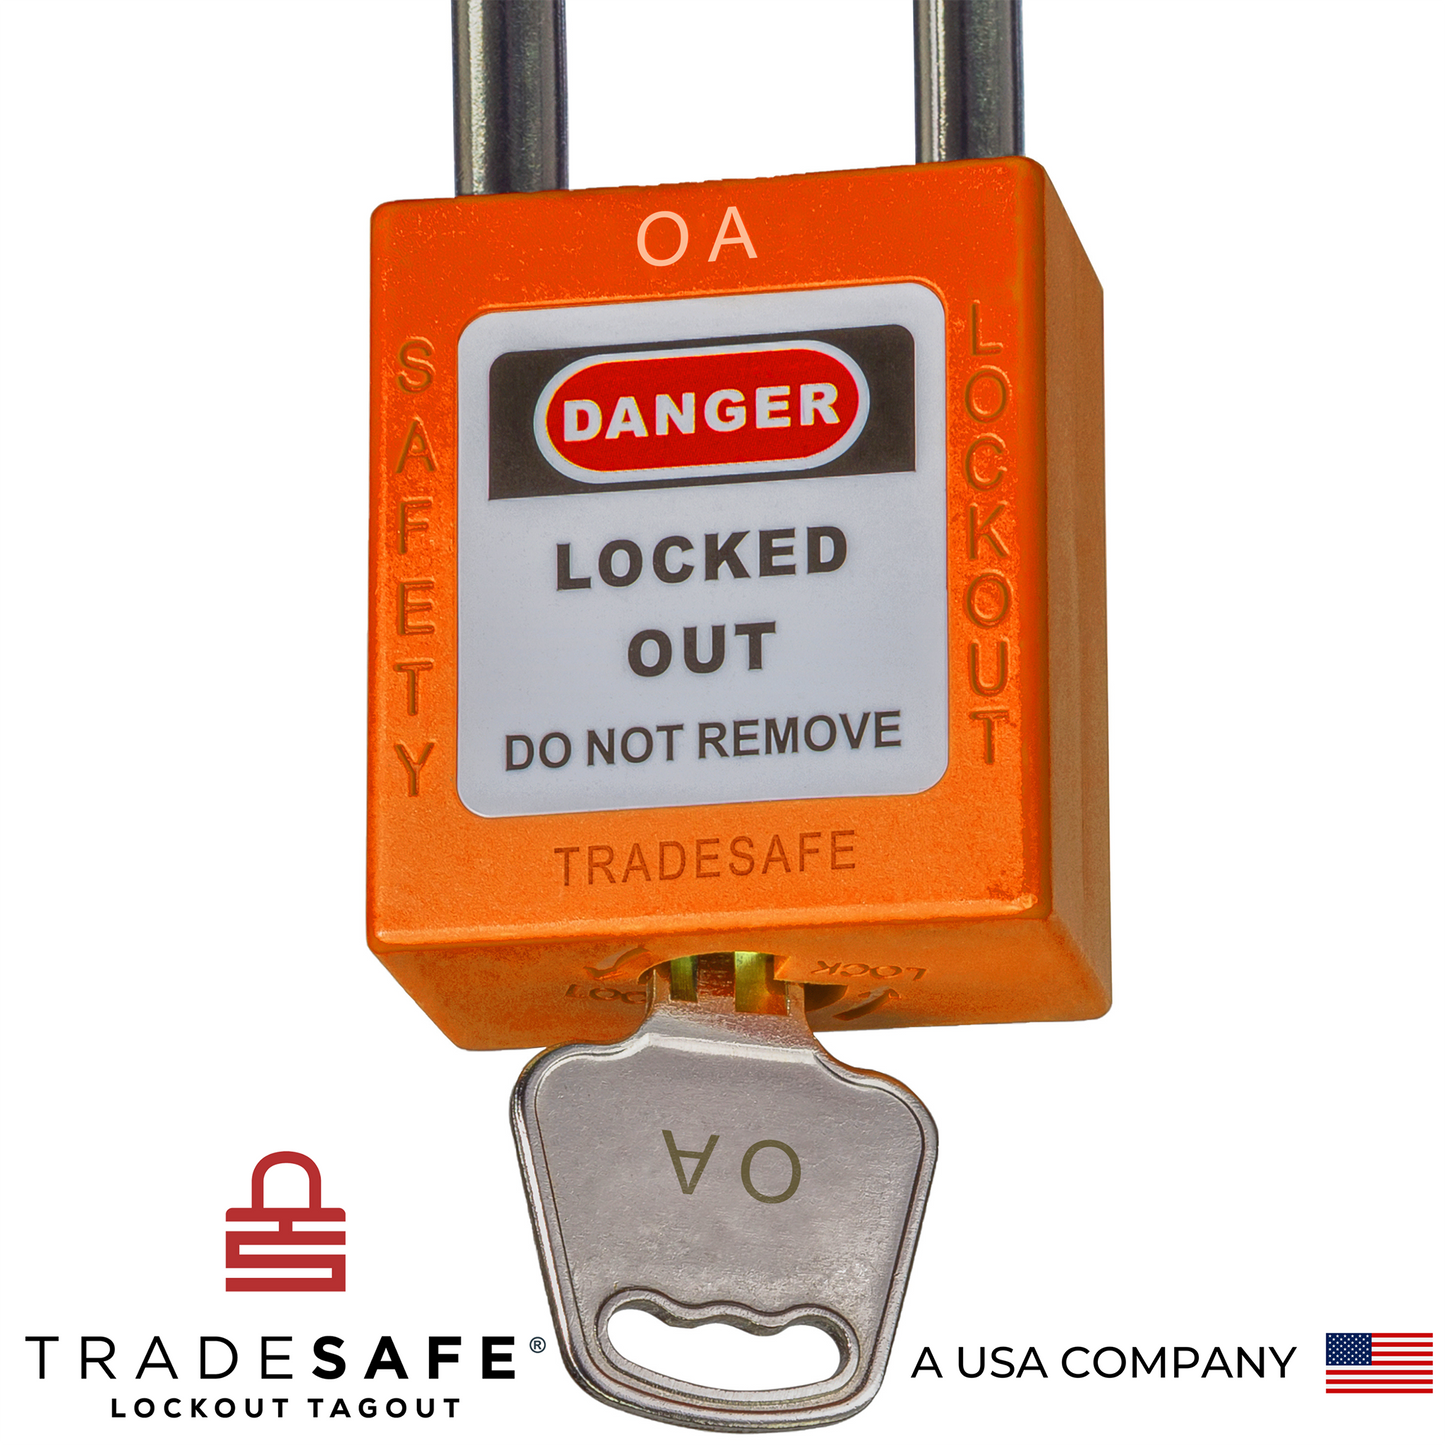 a close-up view of a orange loto padlock's body with a key inserted